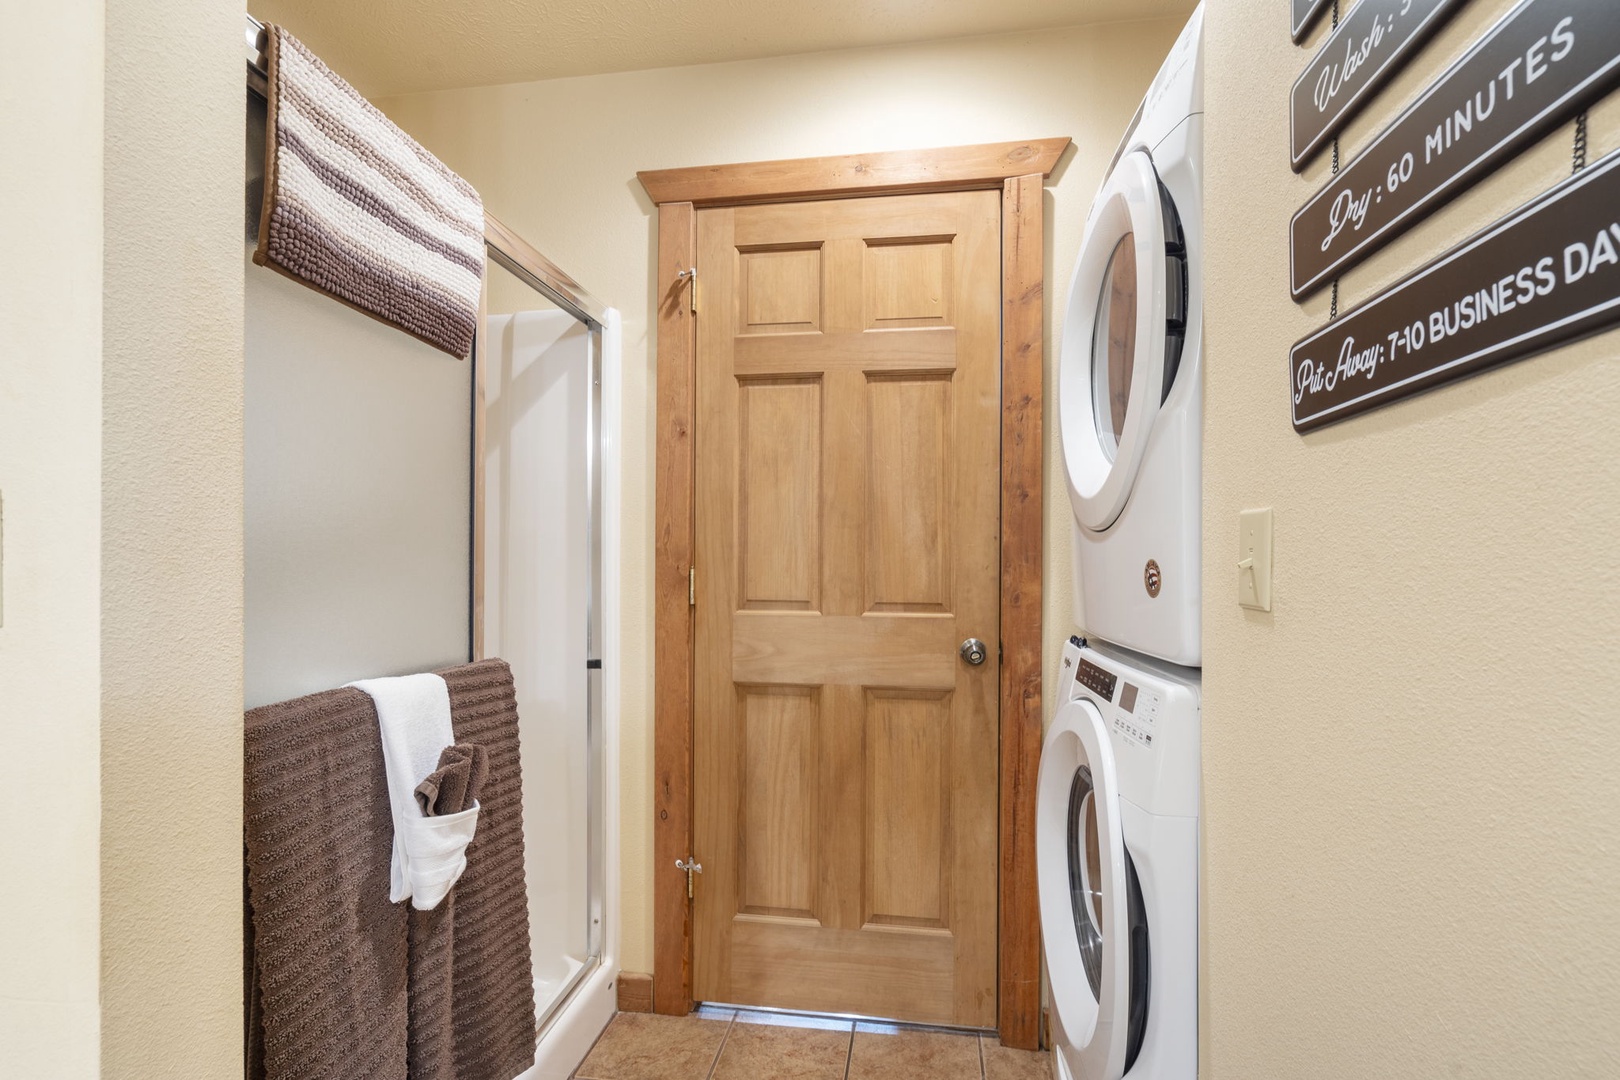 Private laundry is available for your stay, tucked away in the second bath